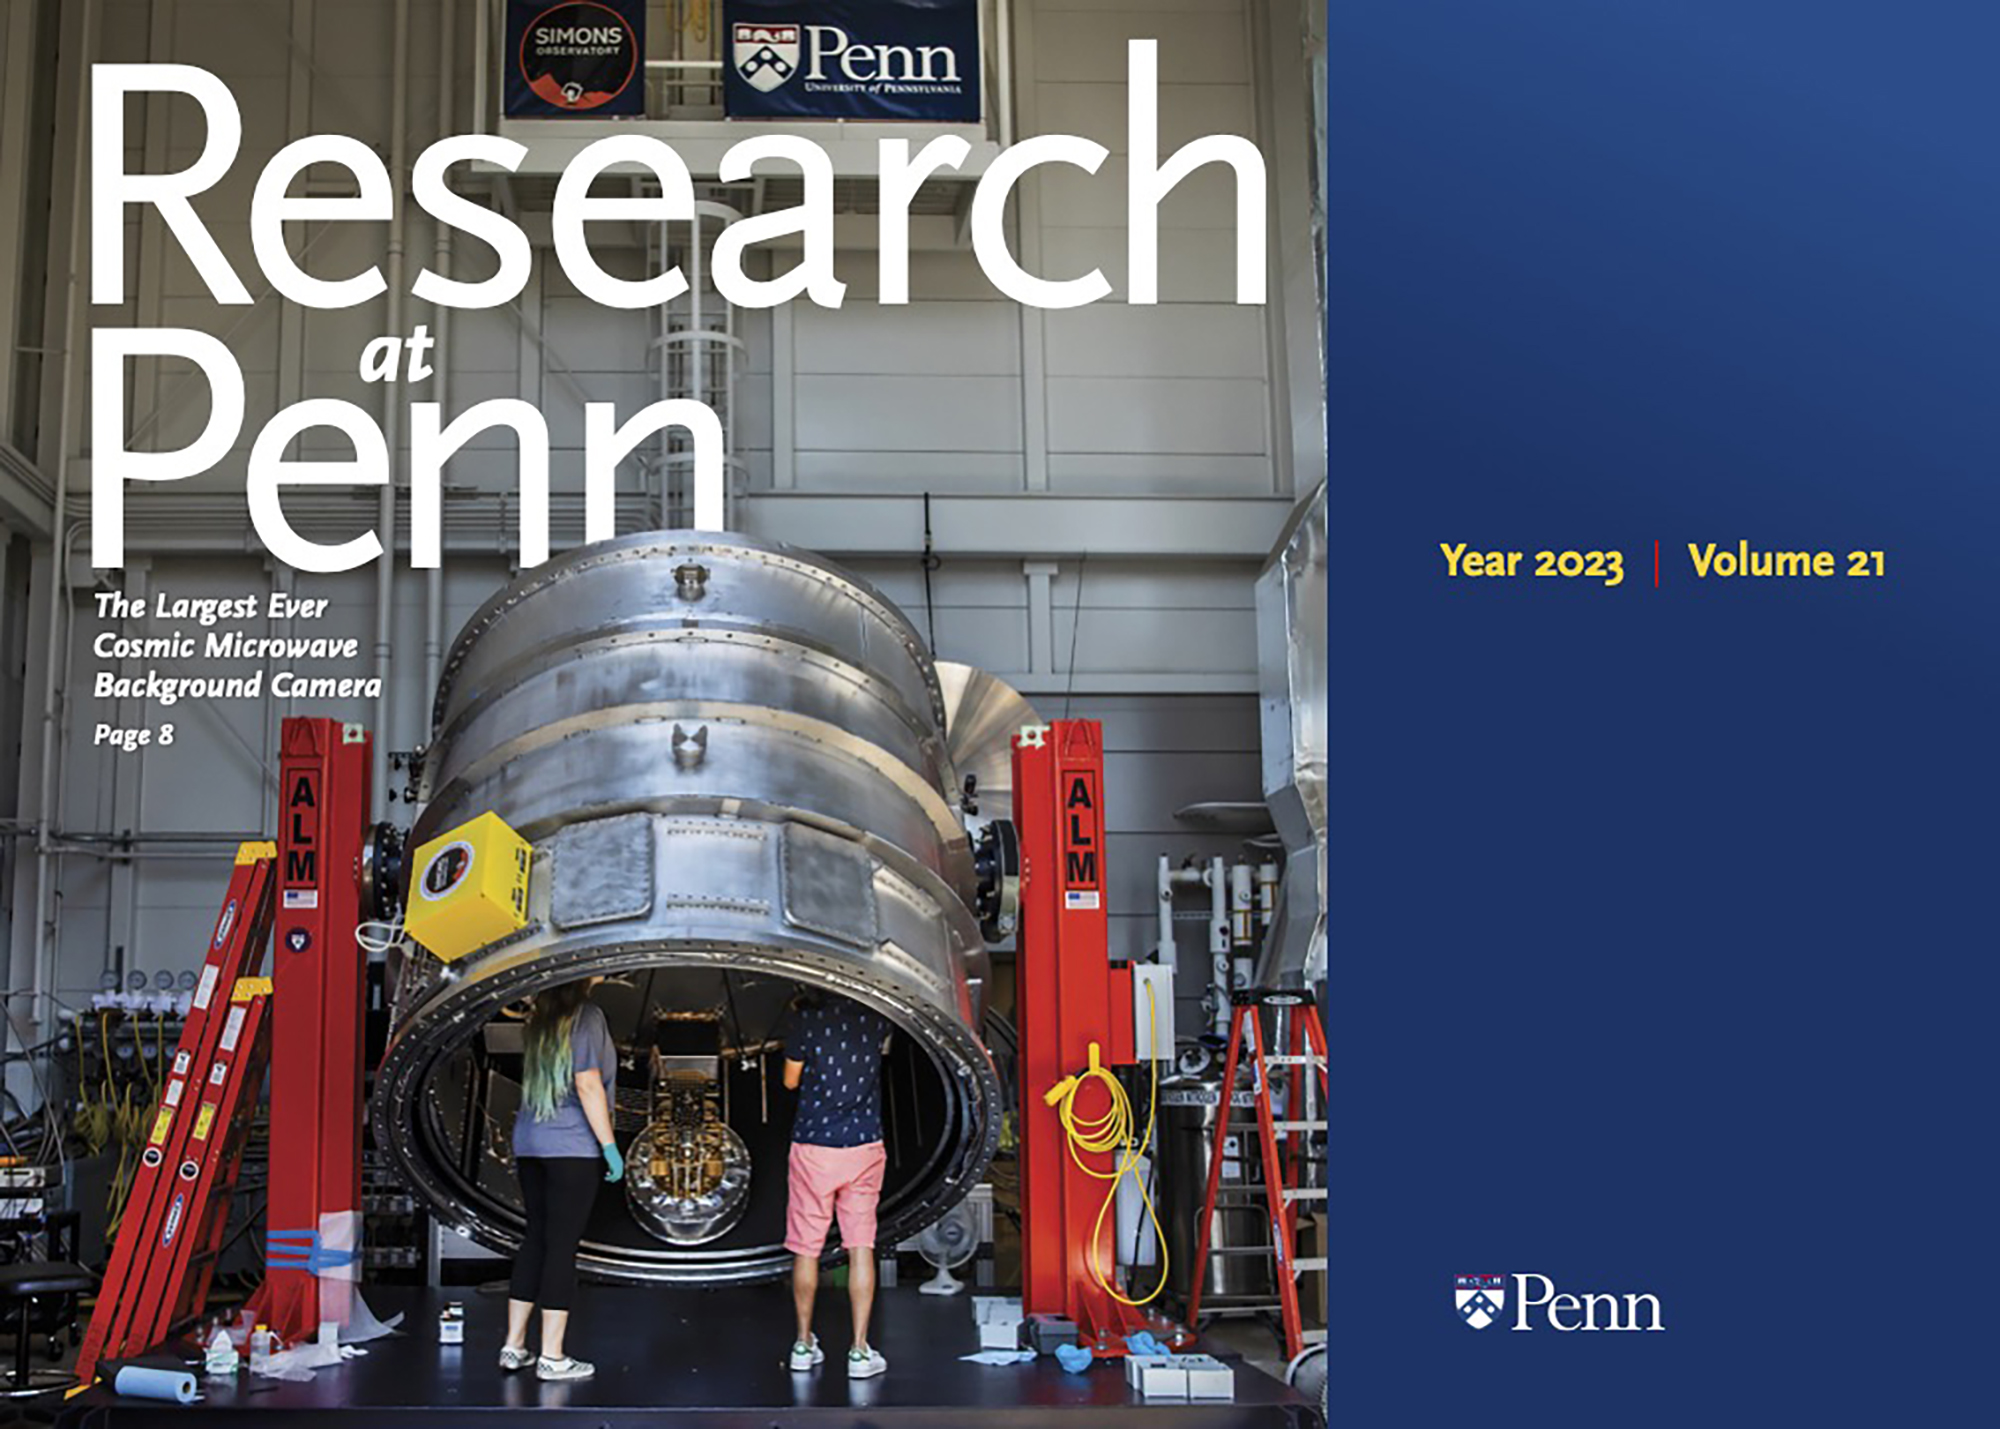 Cover of Research at Penn magazine featuring two people standing near a large piece of metal research equipment.